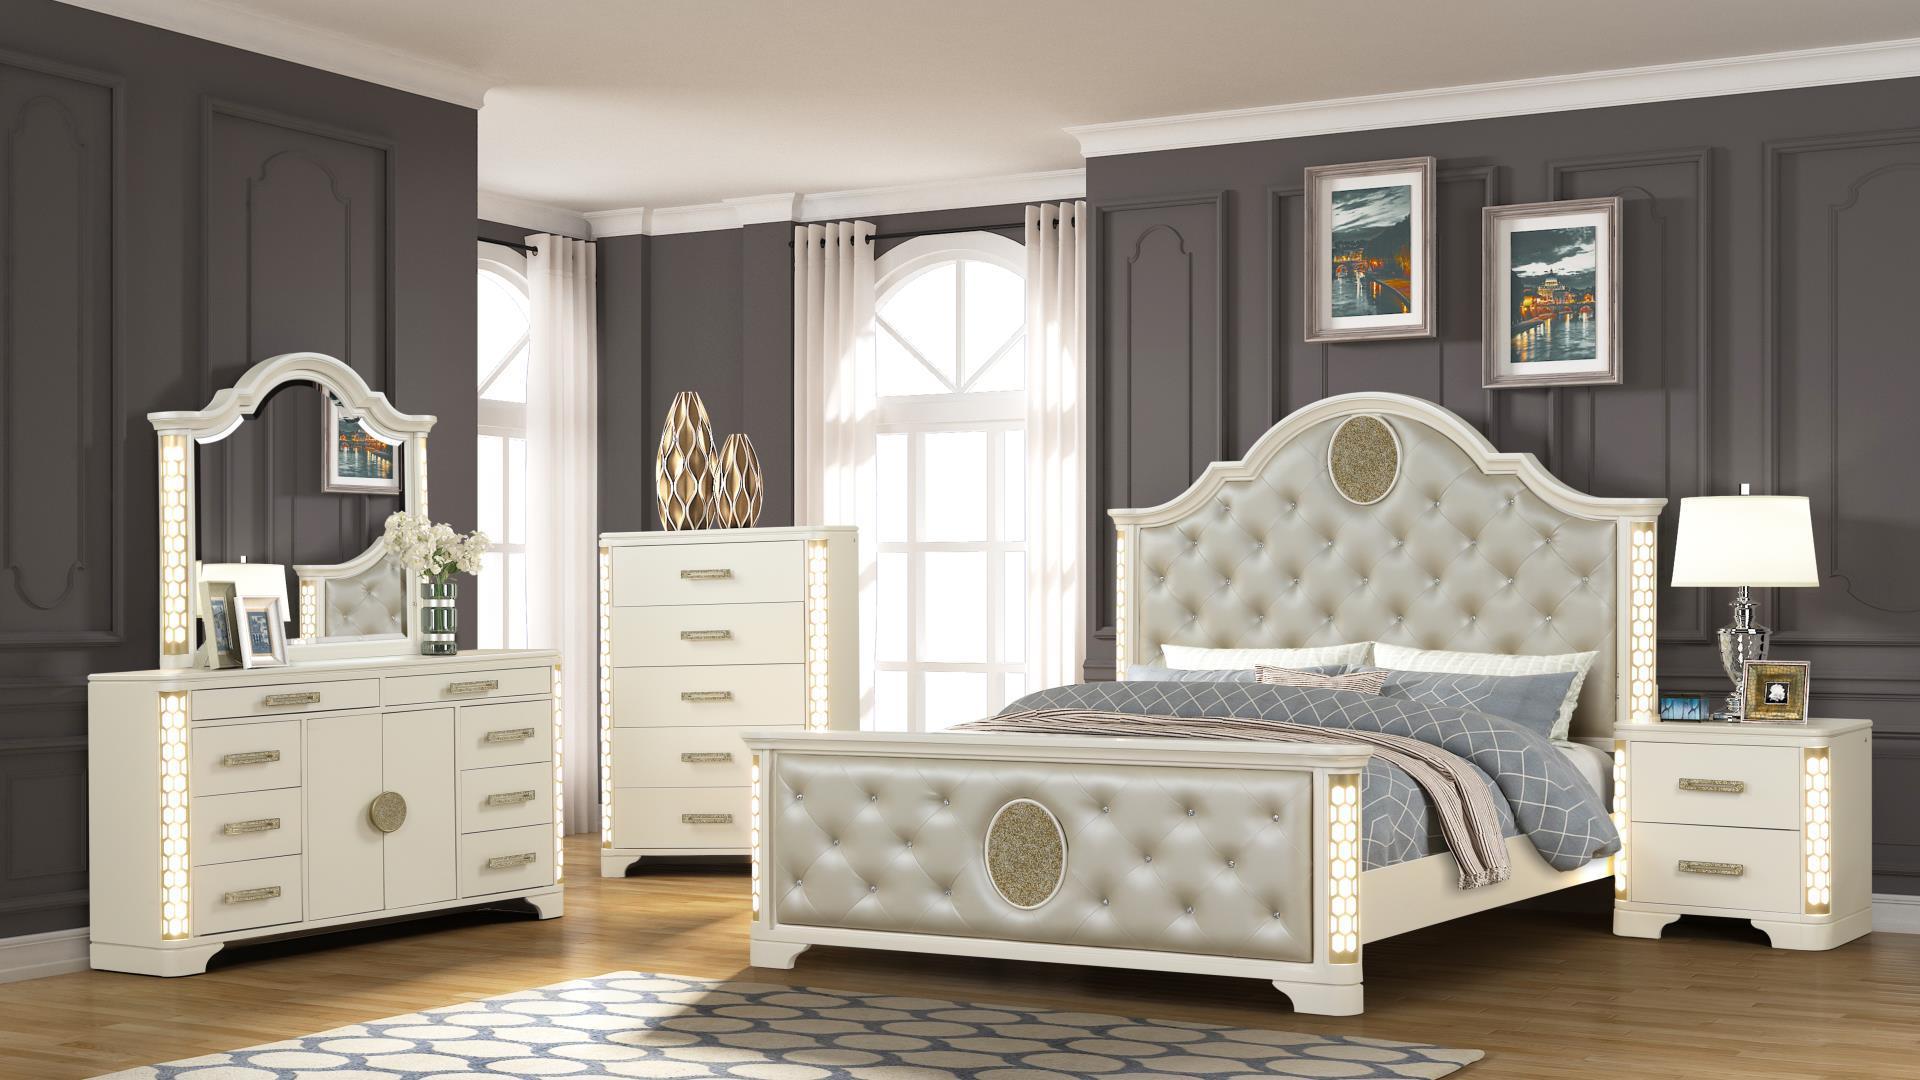 

    
Glam Champagne Queen Bedroom Set 5Pcs JASMINE Galaxy Home Old-World European
